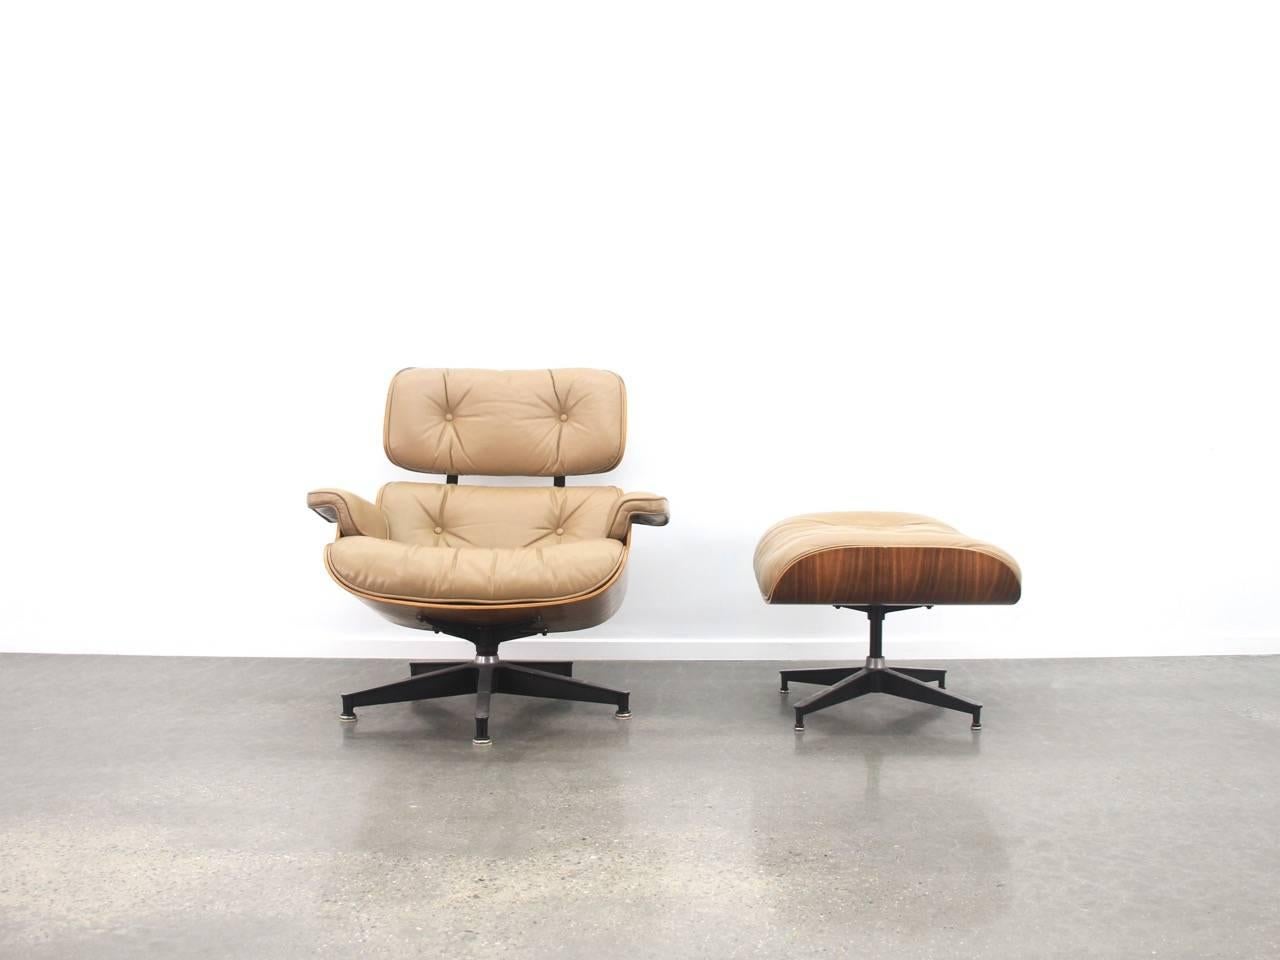 American Eames Lounge Chair and Ottoman in Rosewood and Caramel Coloured Leather, 1970s